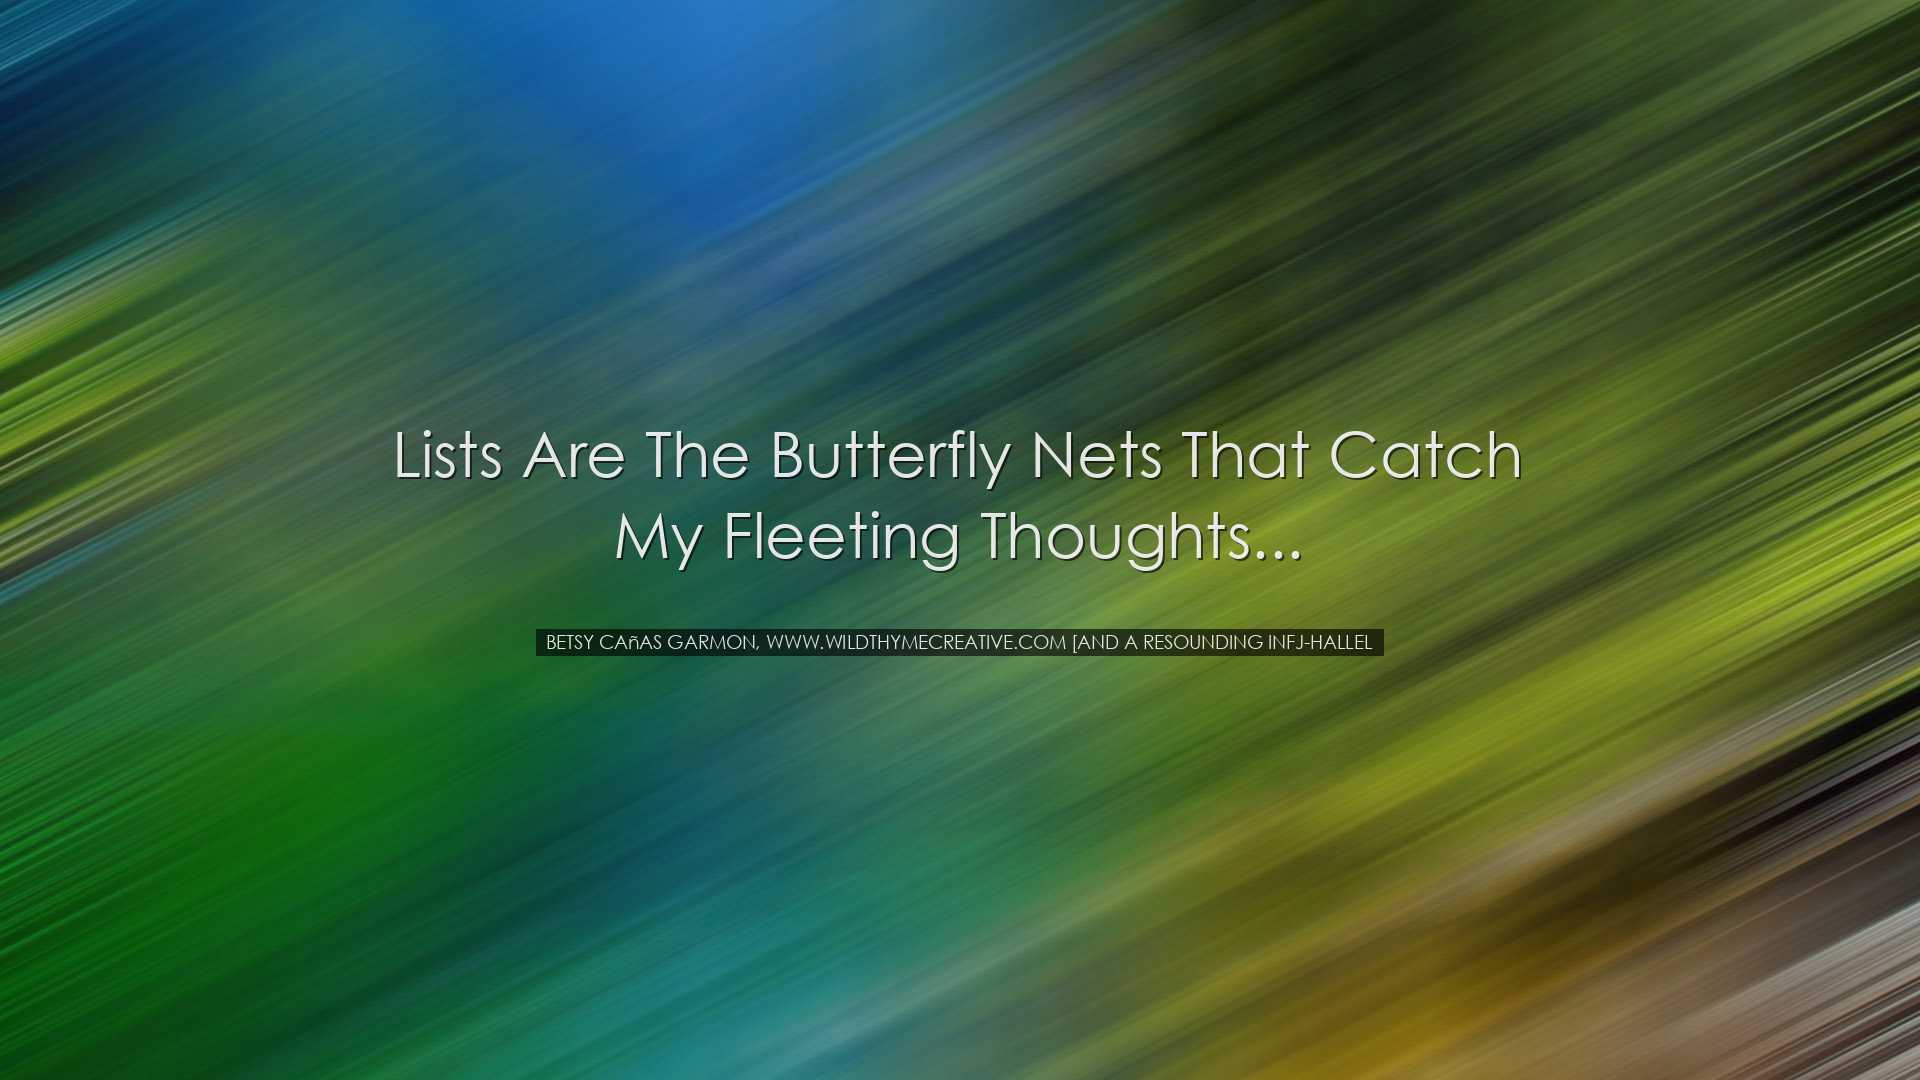 Lists are the butterfly nets that catch my fleeting thoughts... -